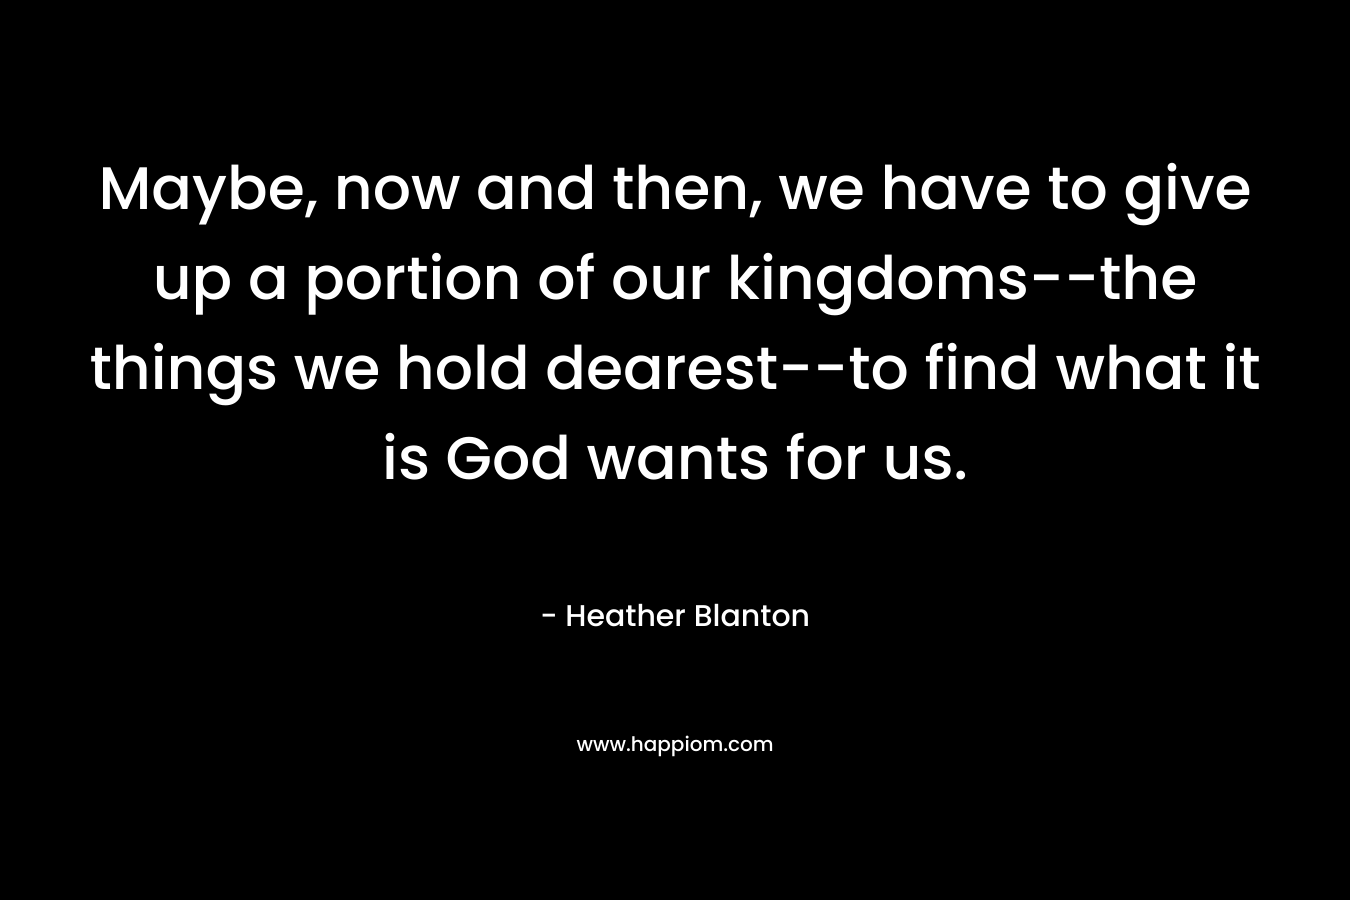 Maybe, now and then, we have to give up a portion of our kingdoms–the things we hold dearest–to find what it is God wants for us. – Heather Blanton